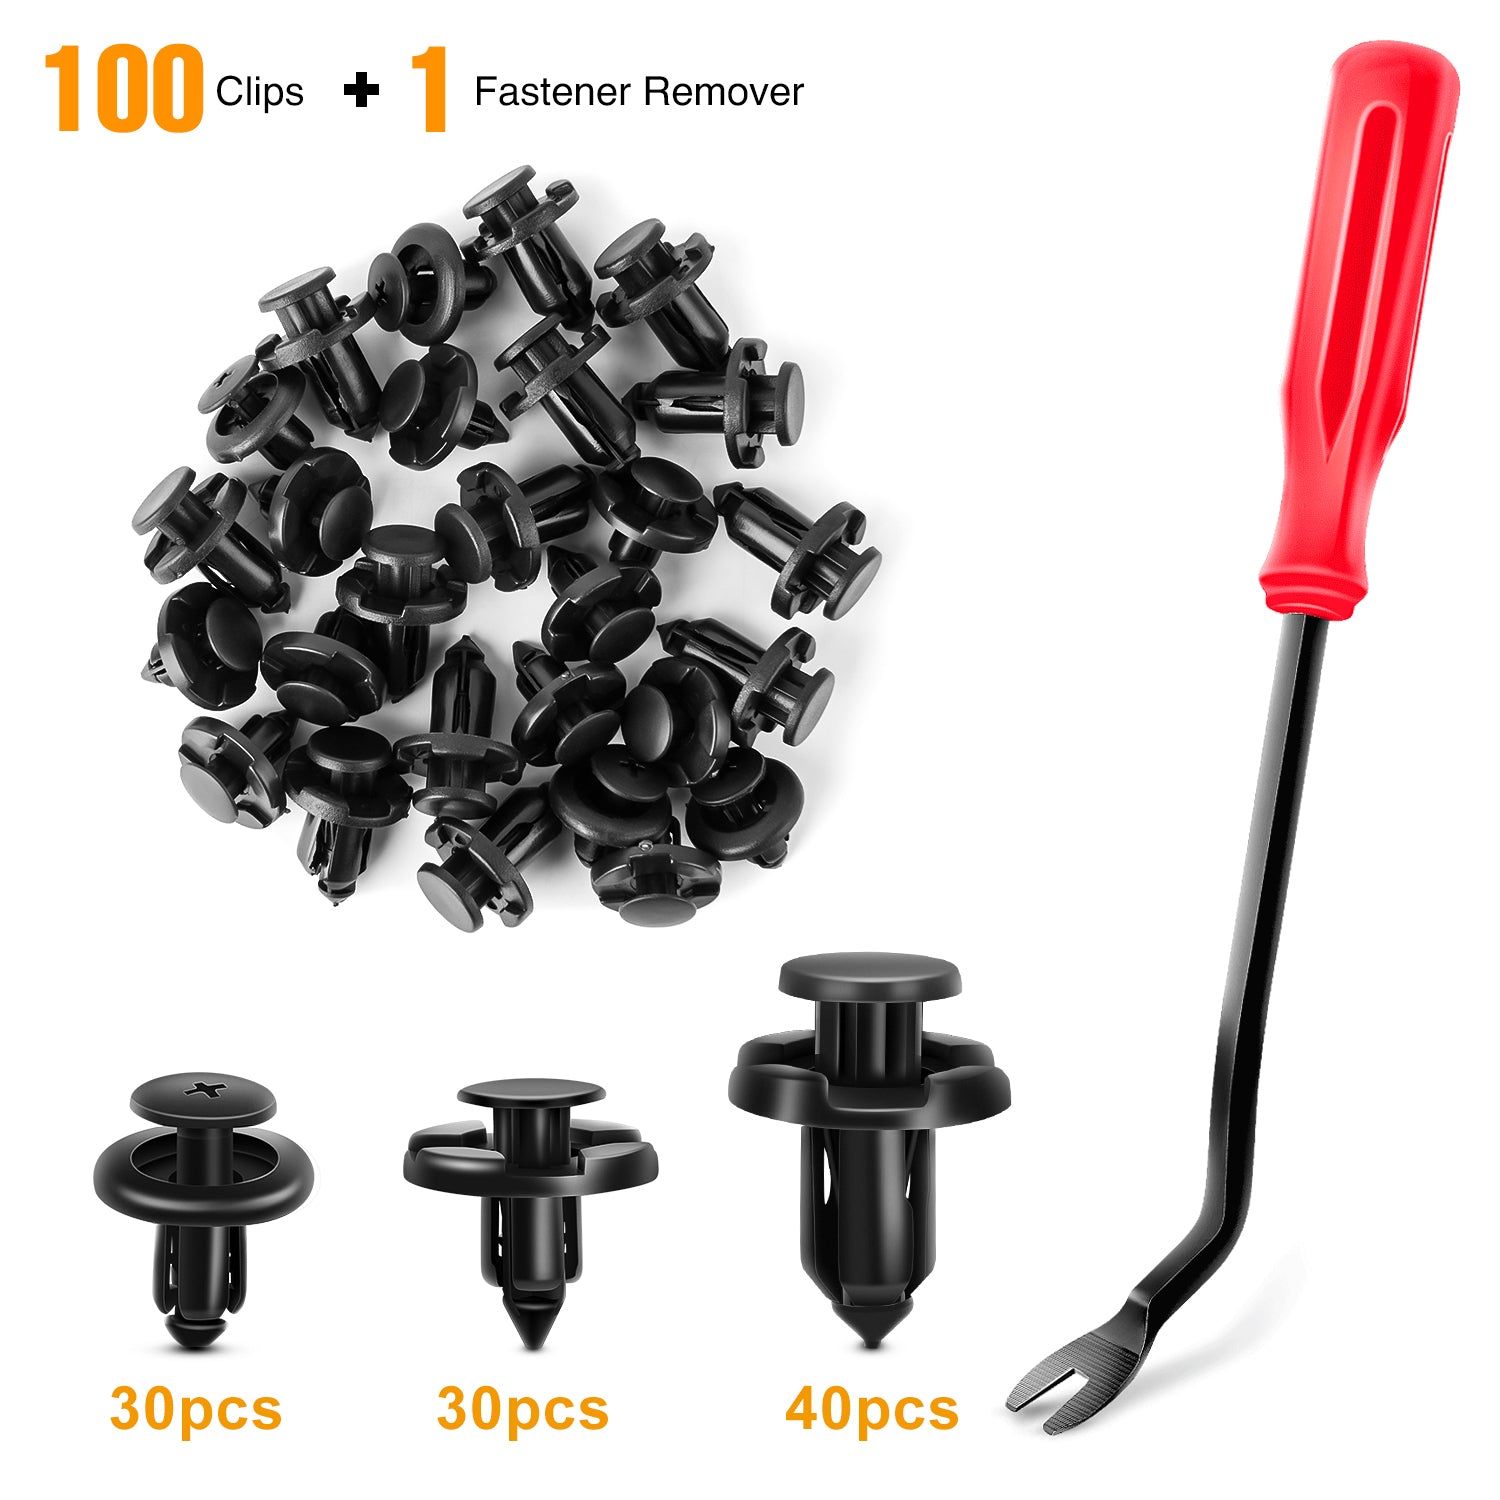 100 Pcs 7mm 8mm 10mm Compatible with Subaru Push Type Retainer Retaining Fasteners Rivets Clips OEM Upgrade for 90914-0007, 90913-0067 & 90914-0051 + Bonus Fastener Remover